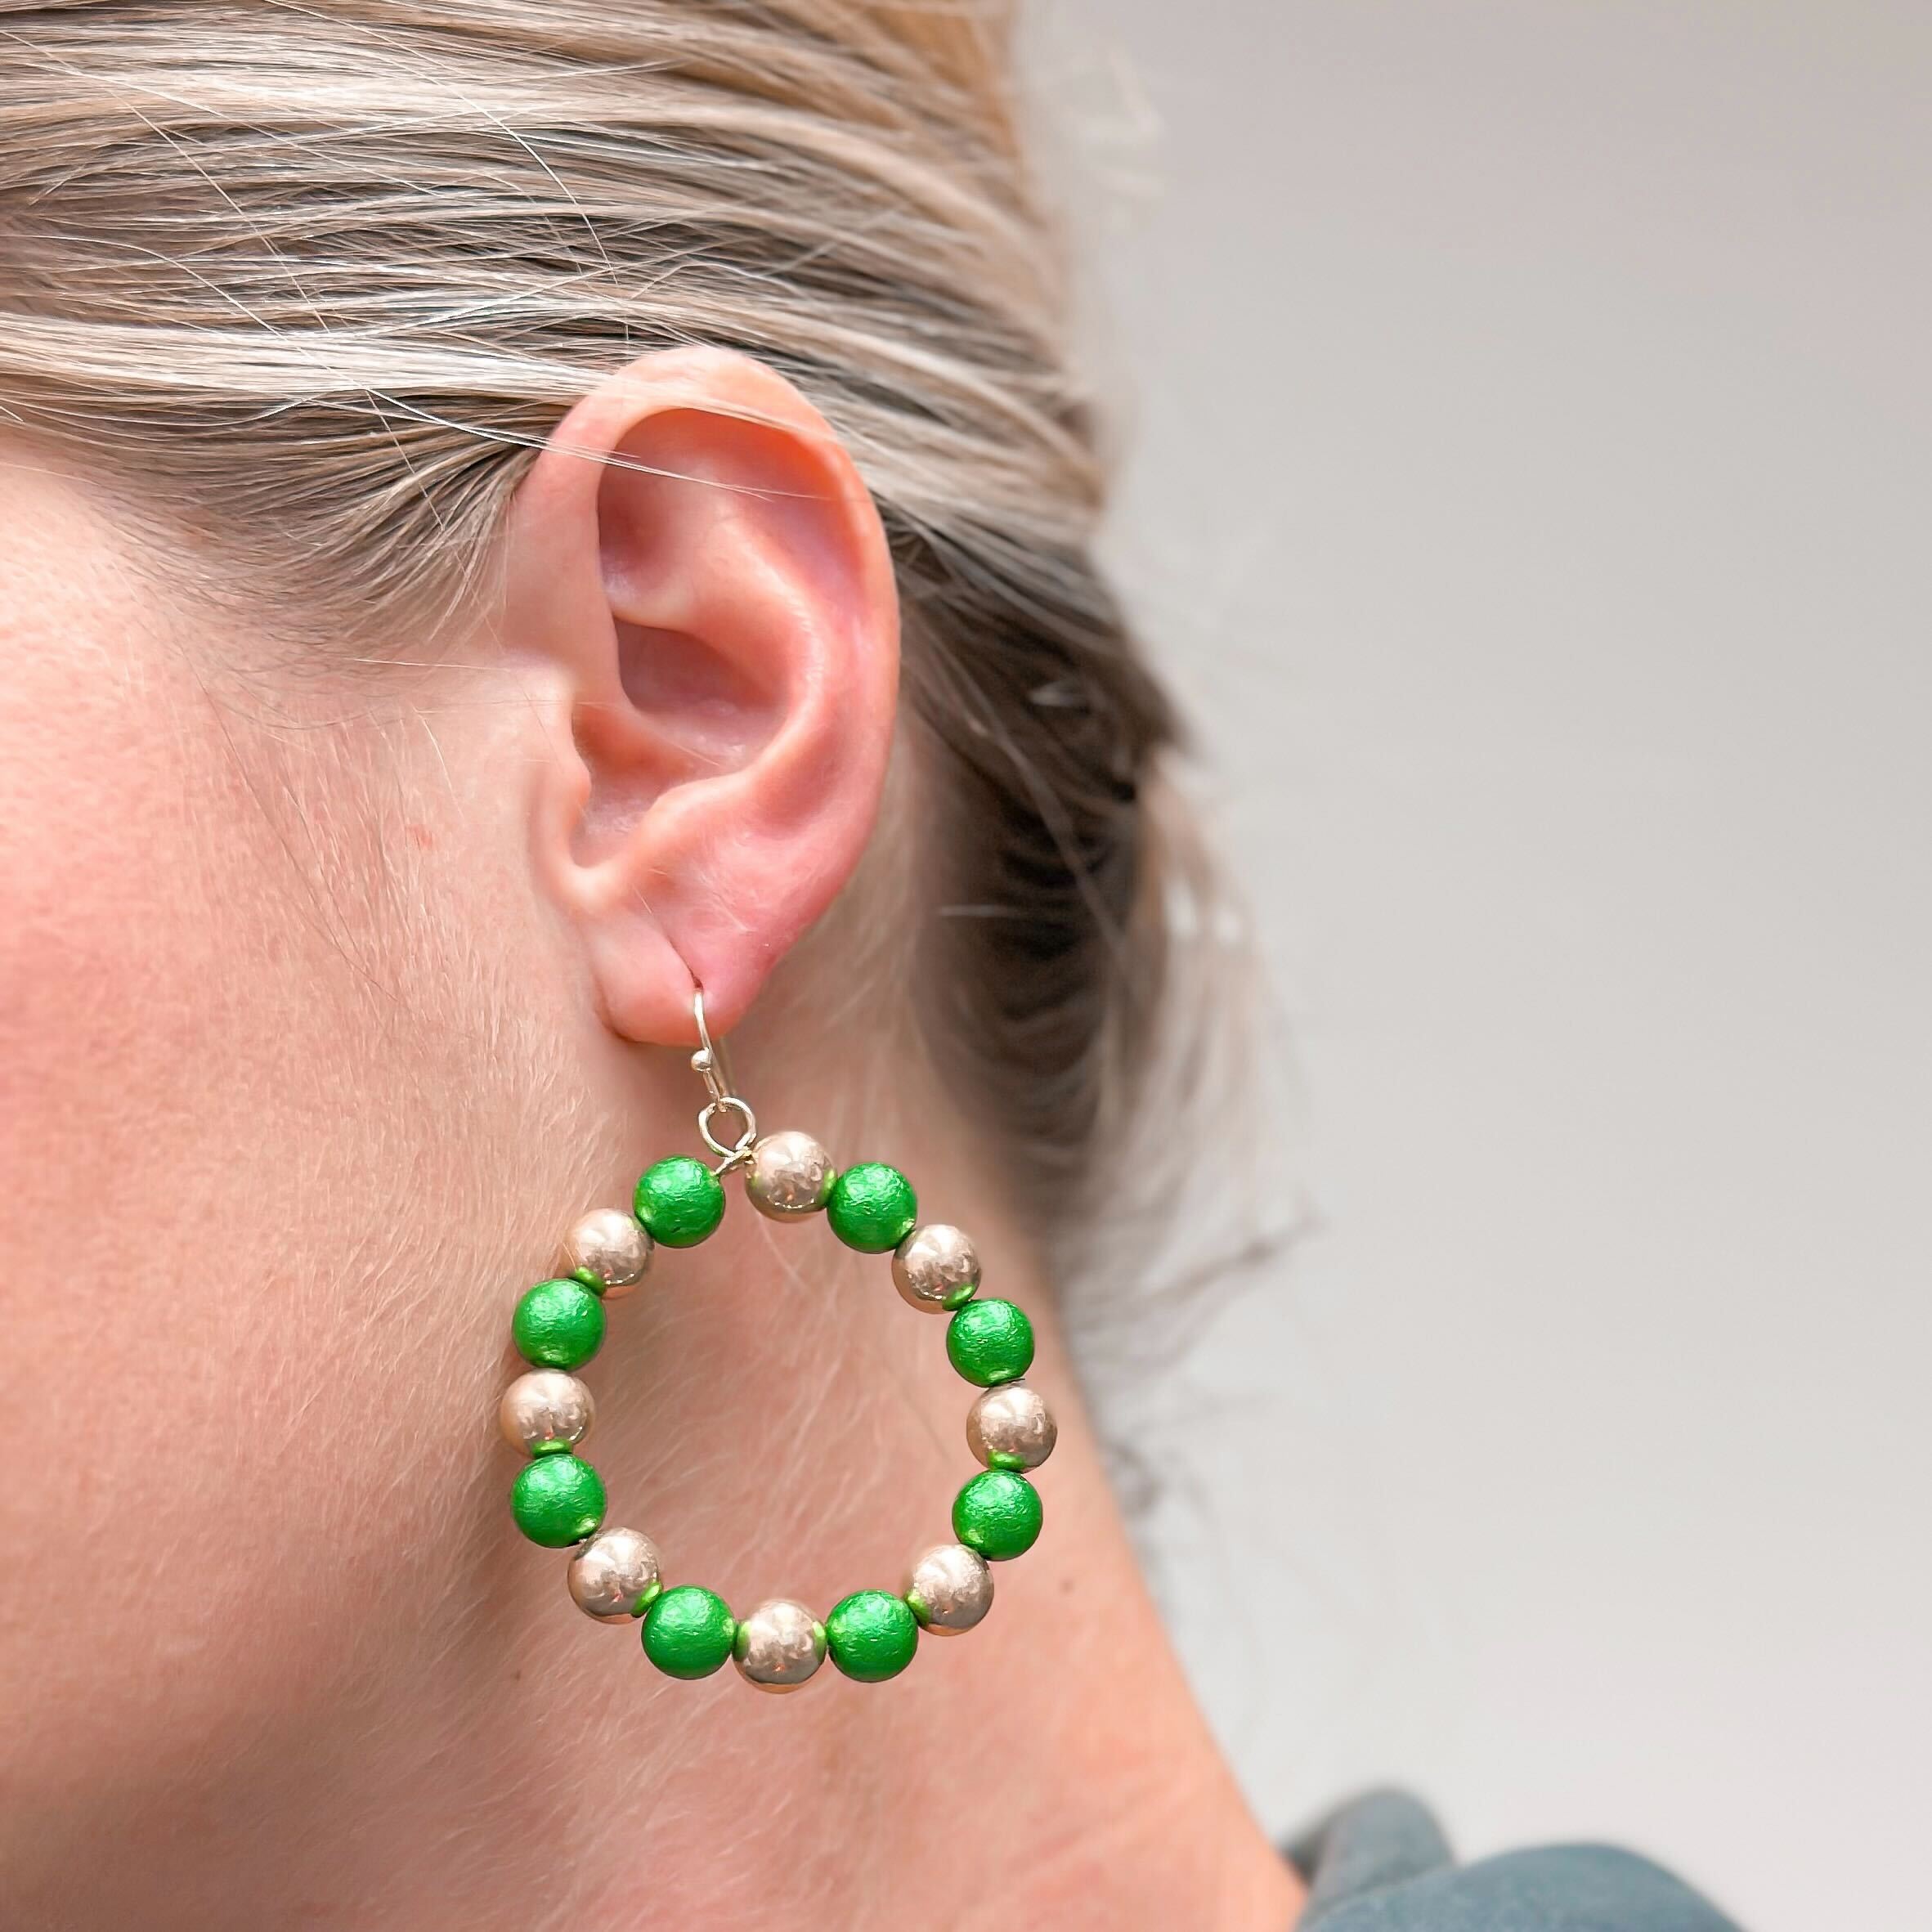 Round Holiday Beaded Dangle Earrings - Green